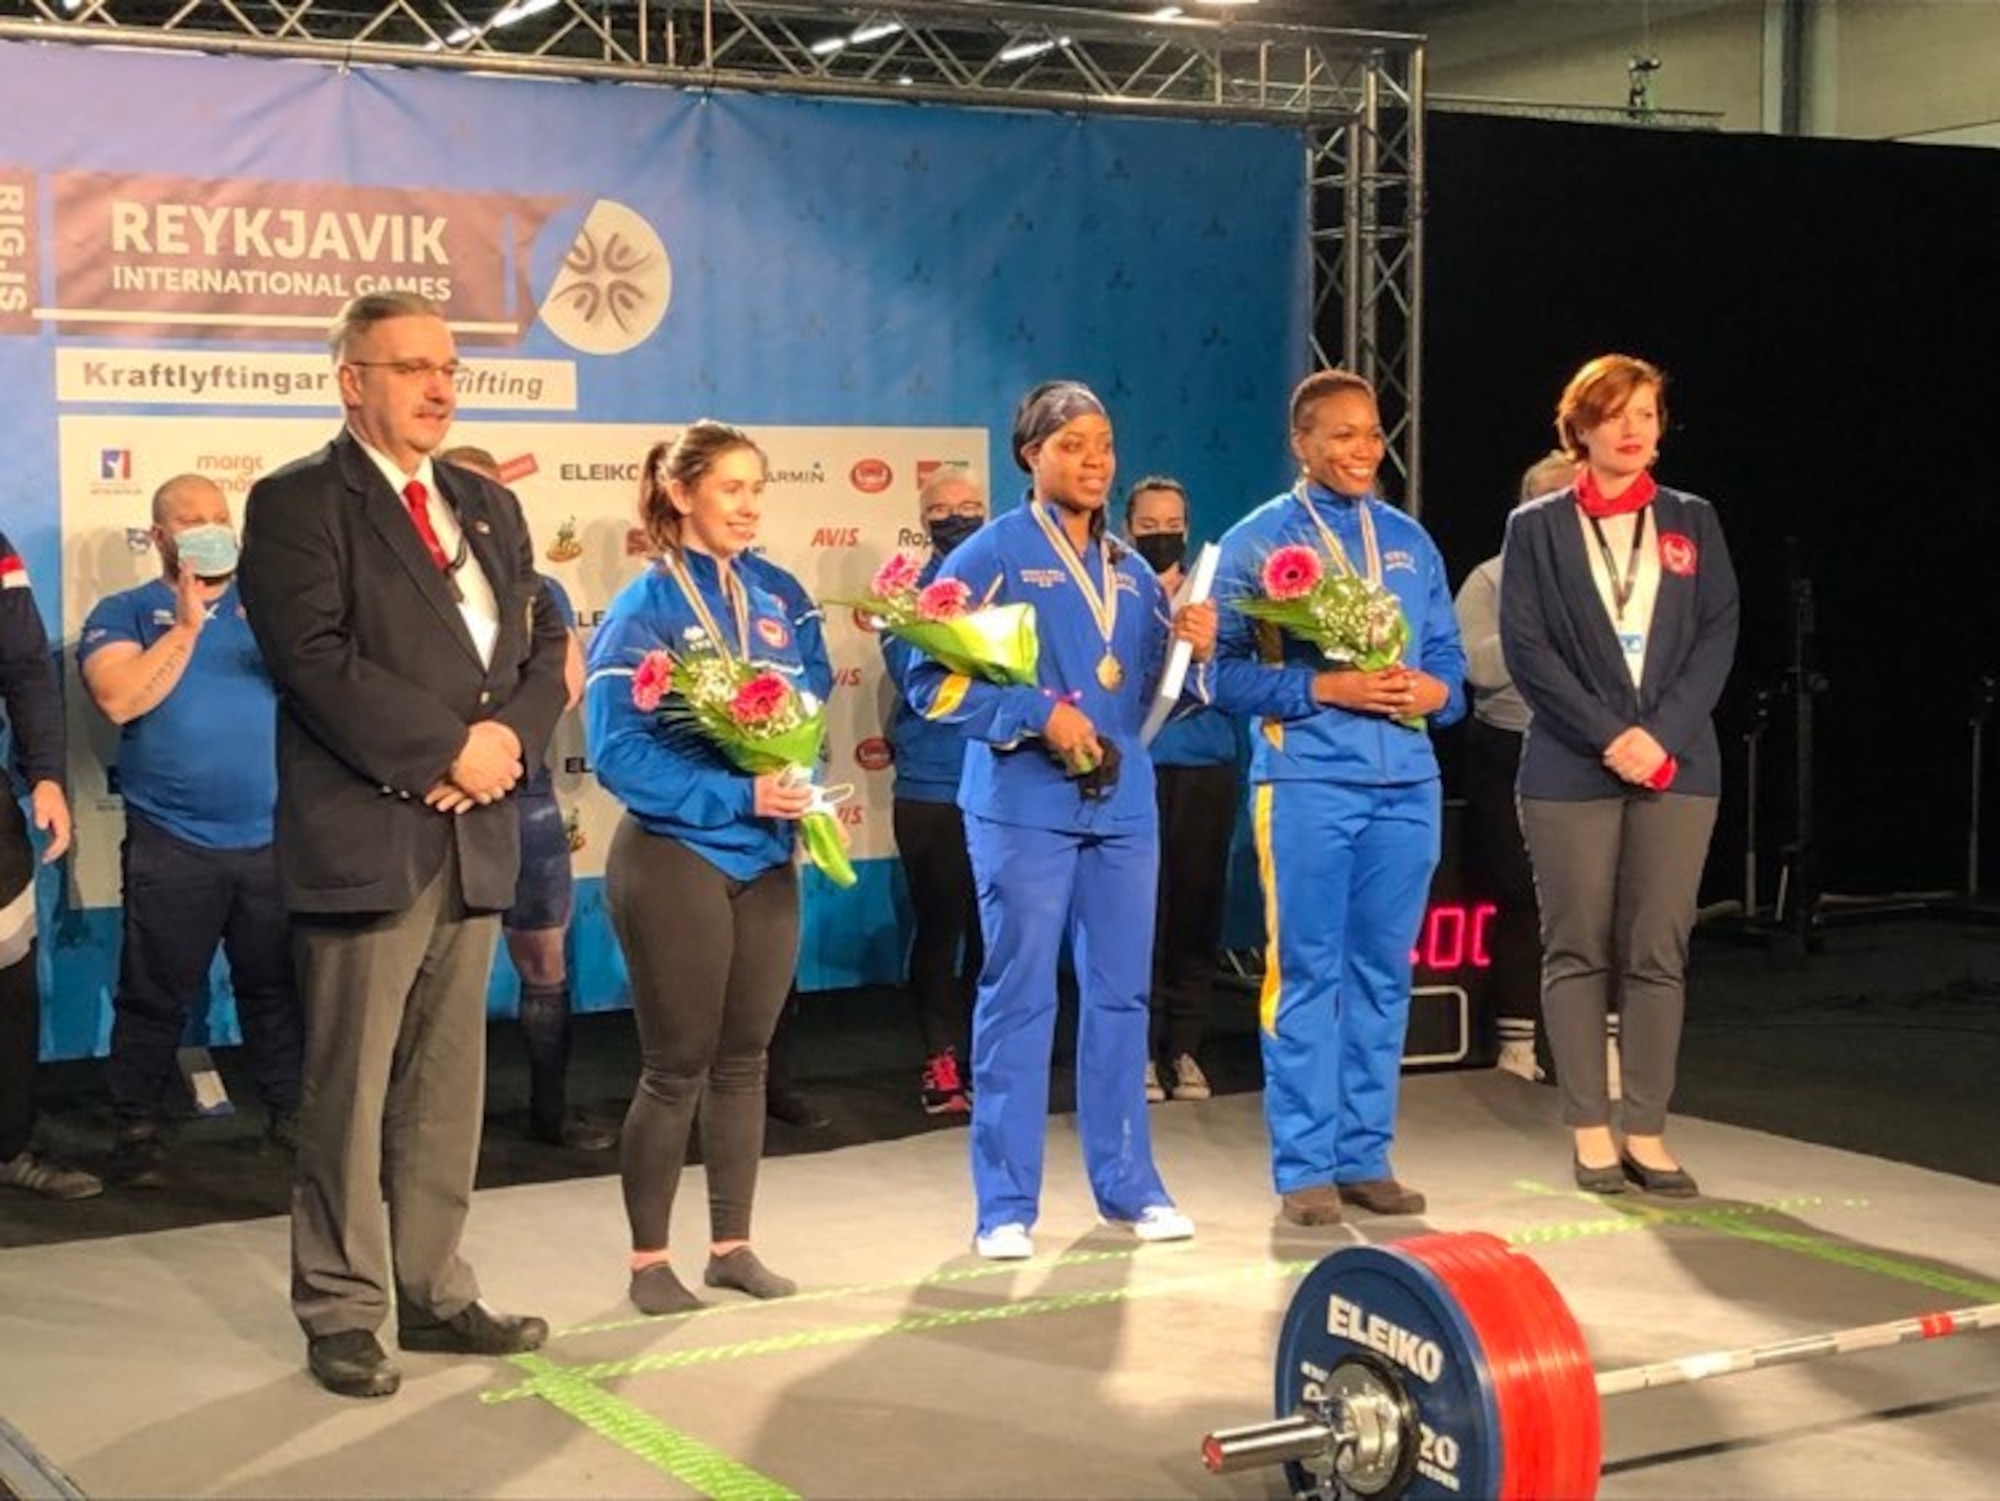 A photo of Danielle Todman posing for a photo at the 2022 Reykjavic International Games.